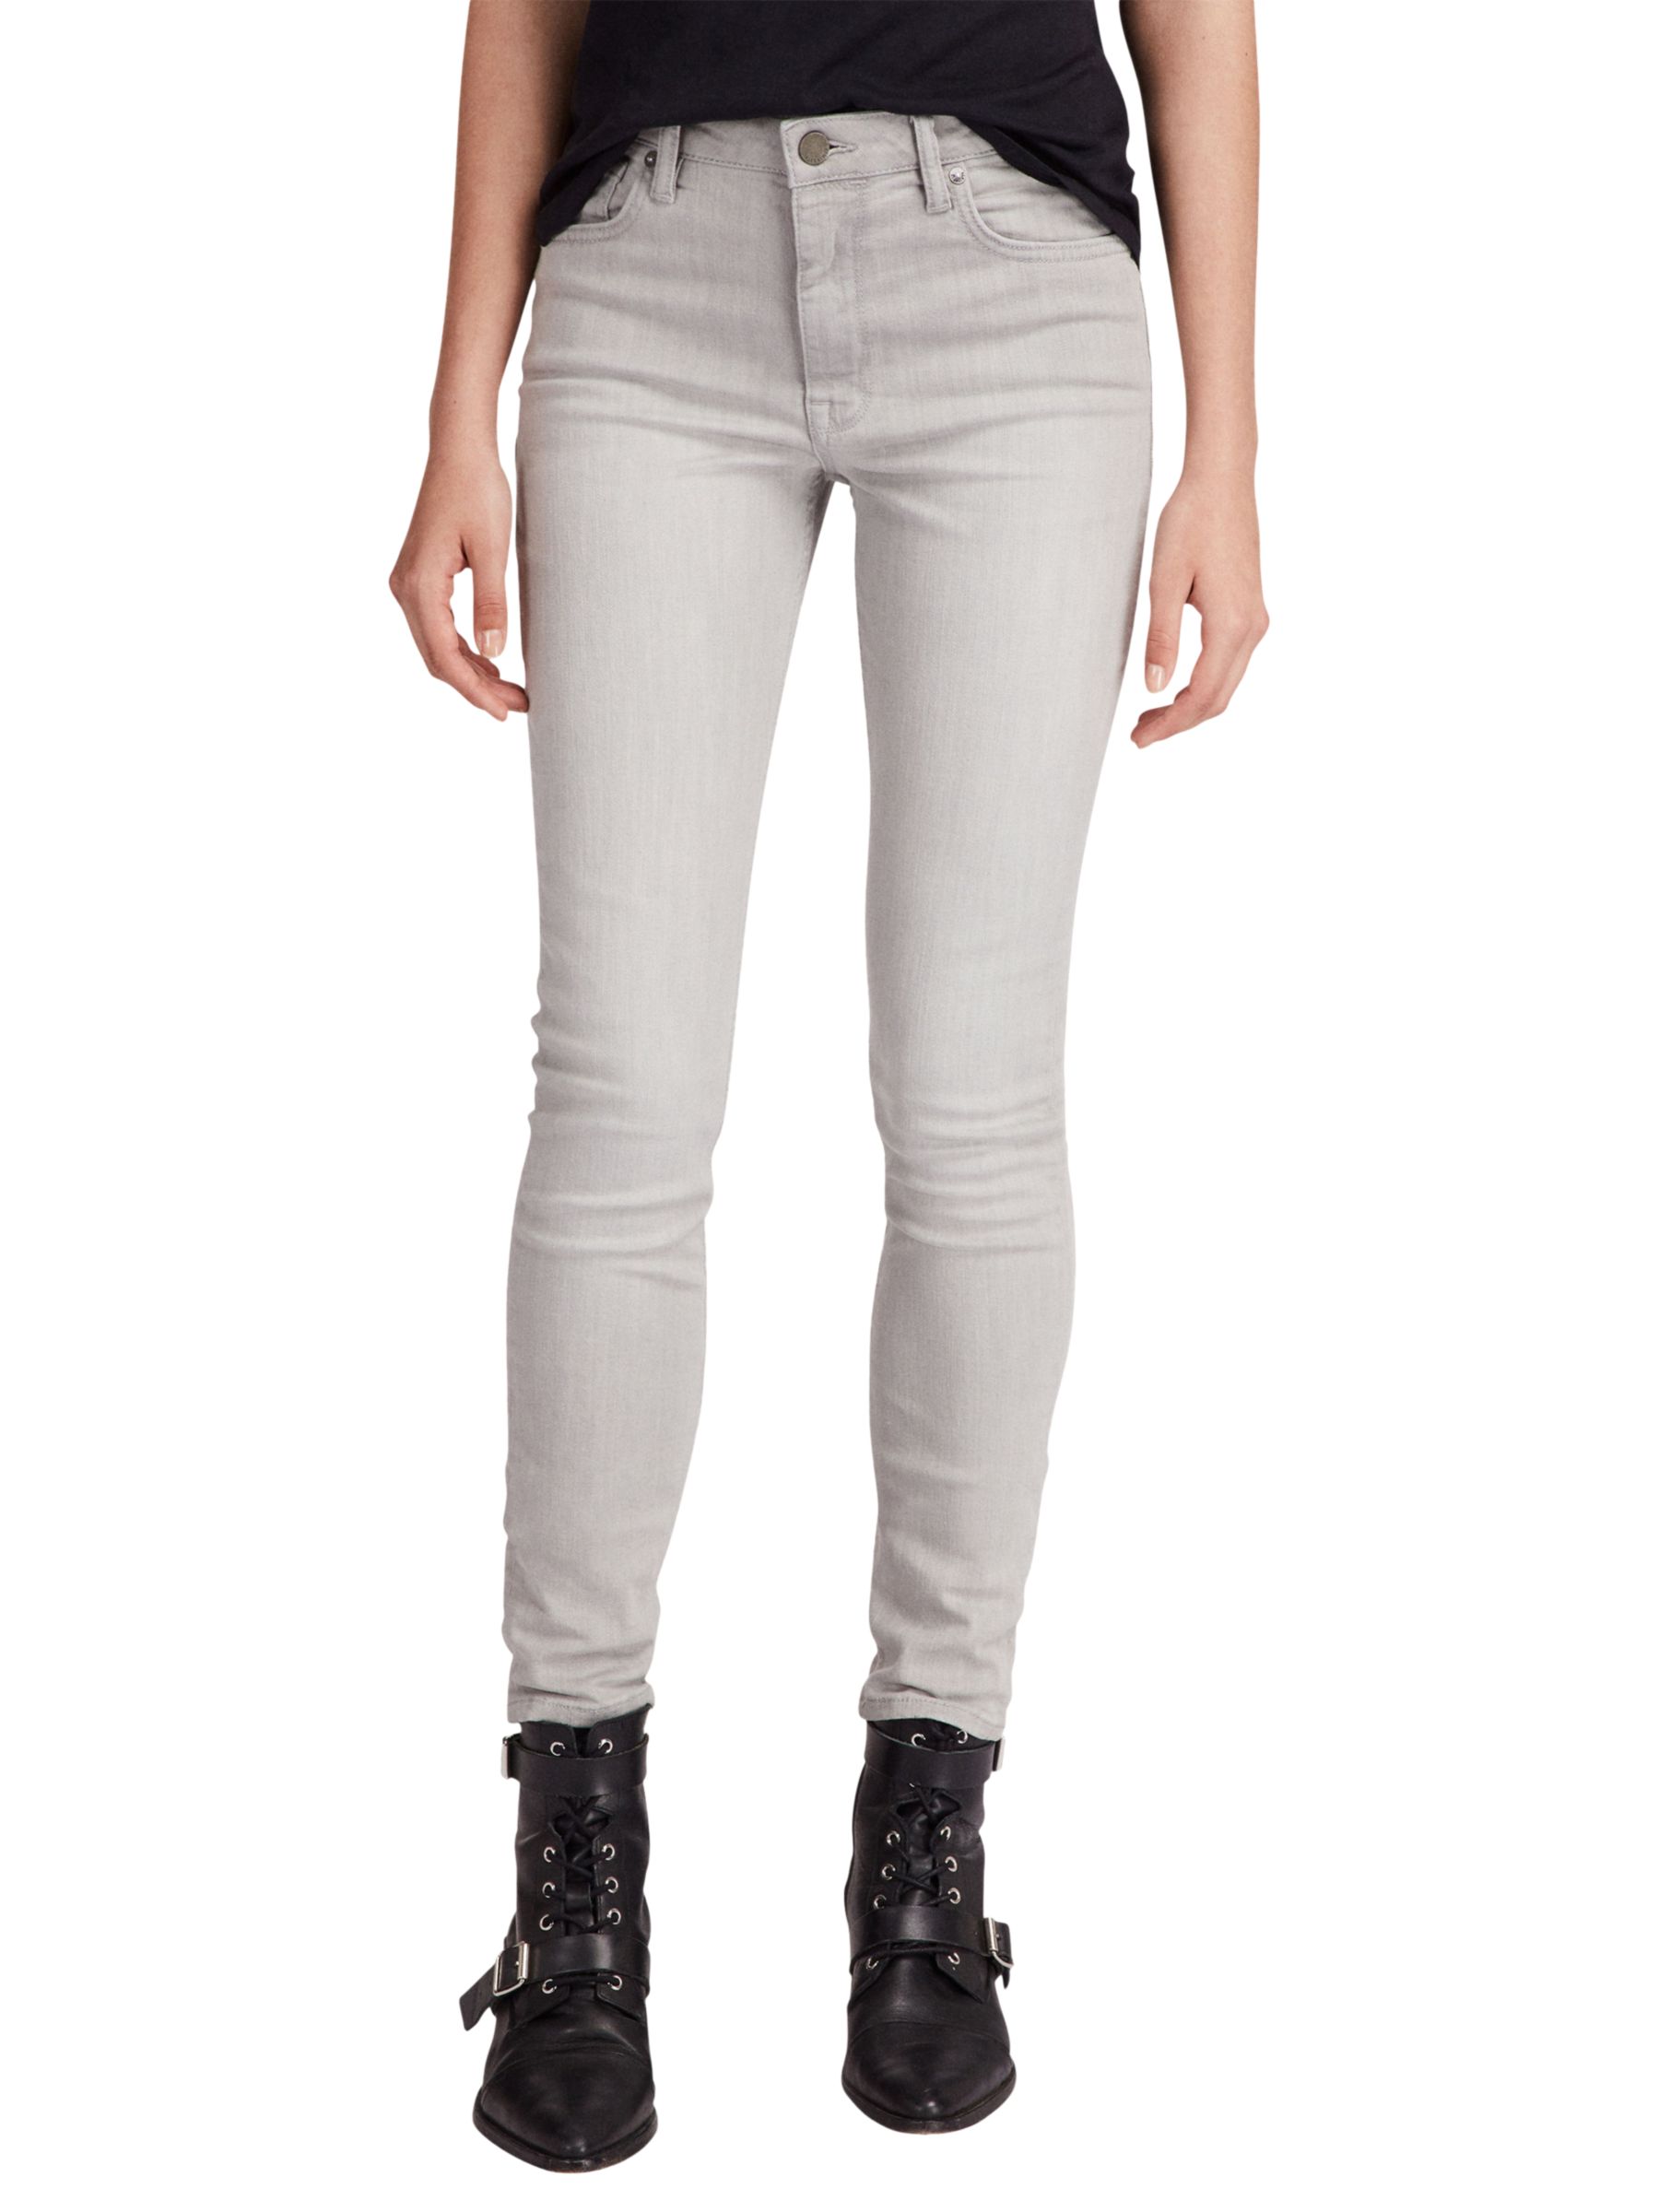 pale grey jeans womens